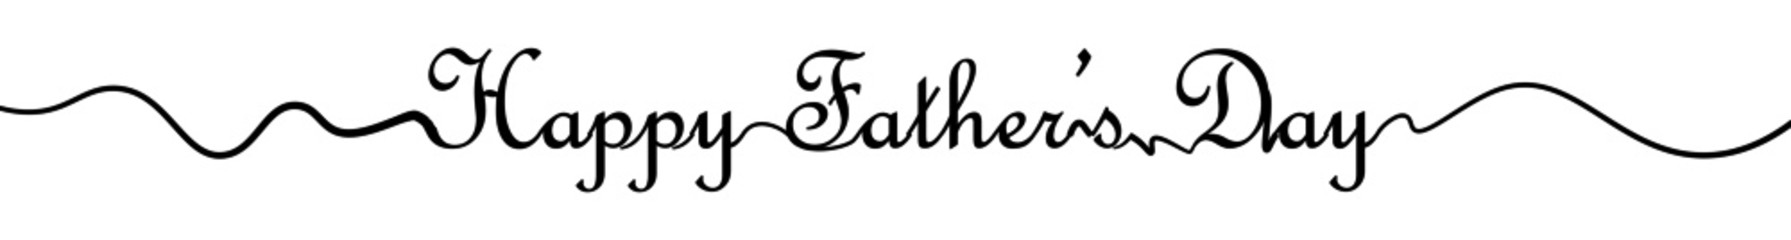 happy father's day vector typography banner with brush calligraphy.